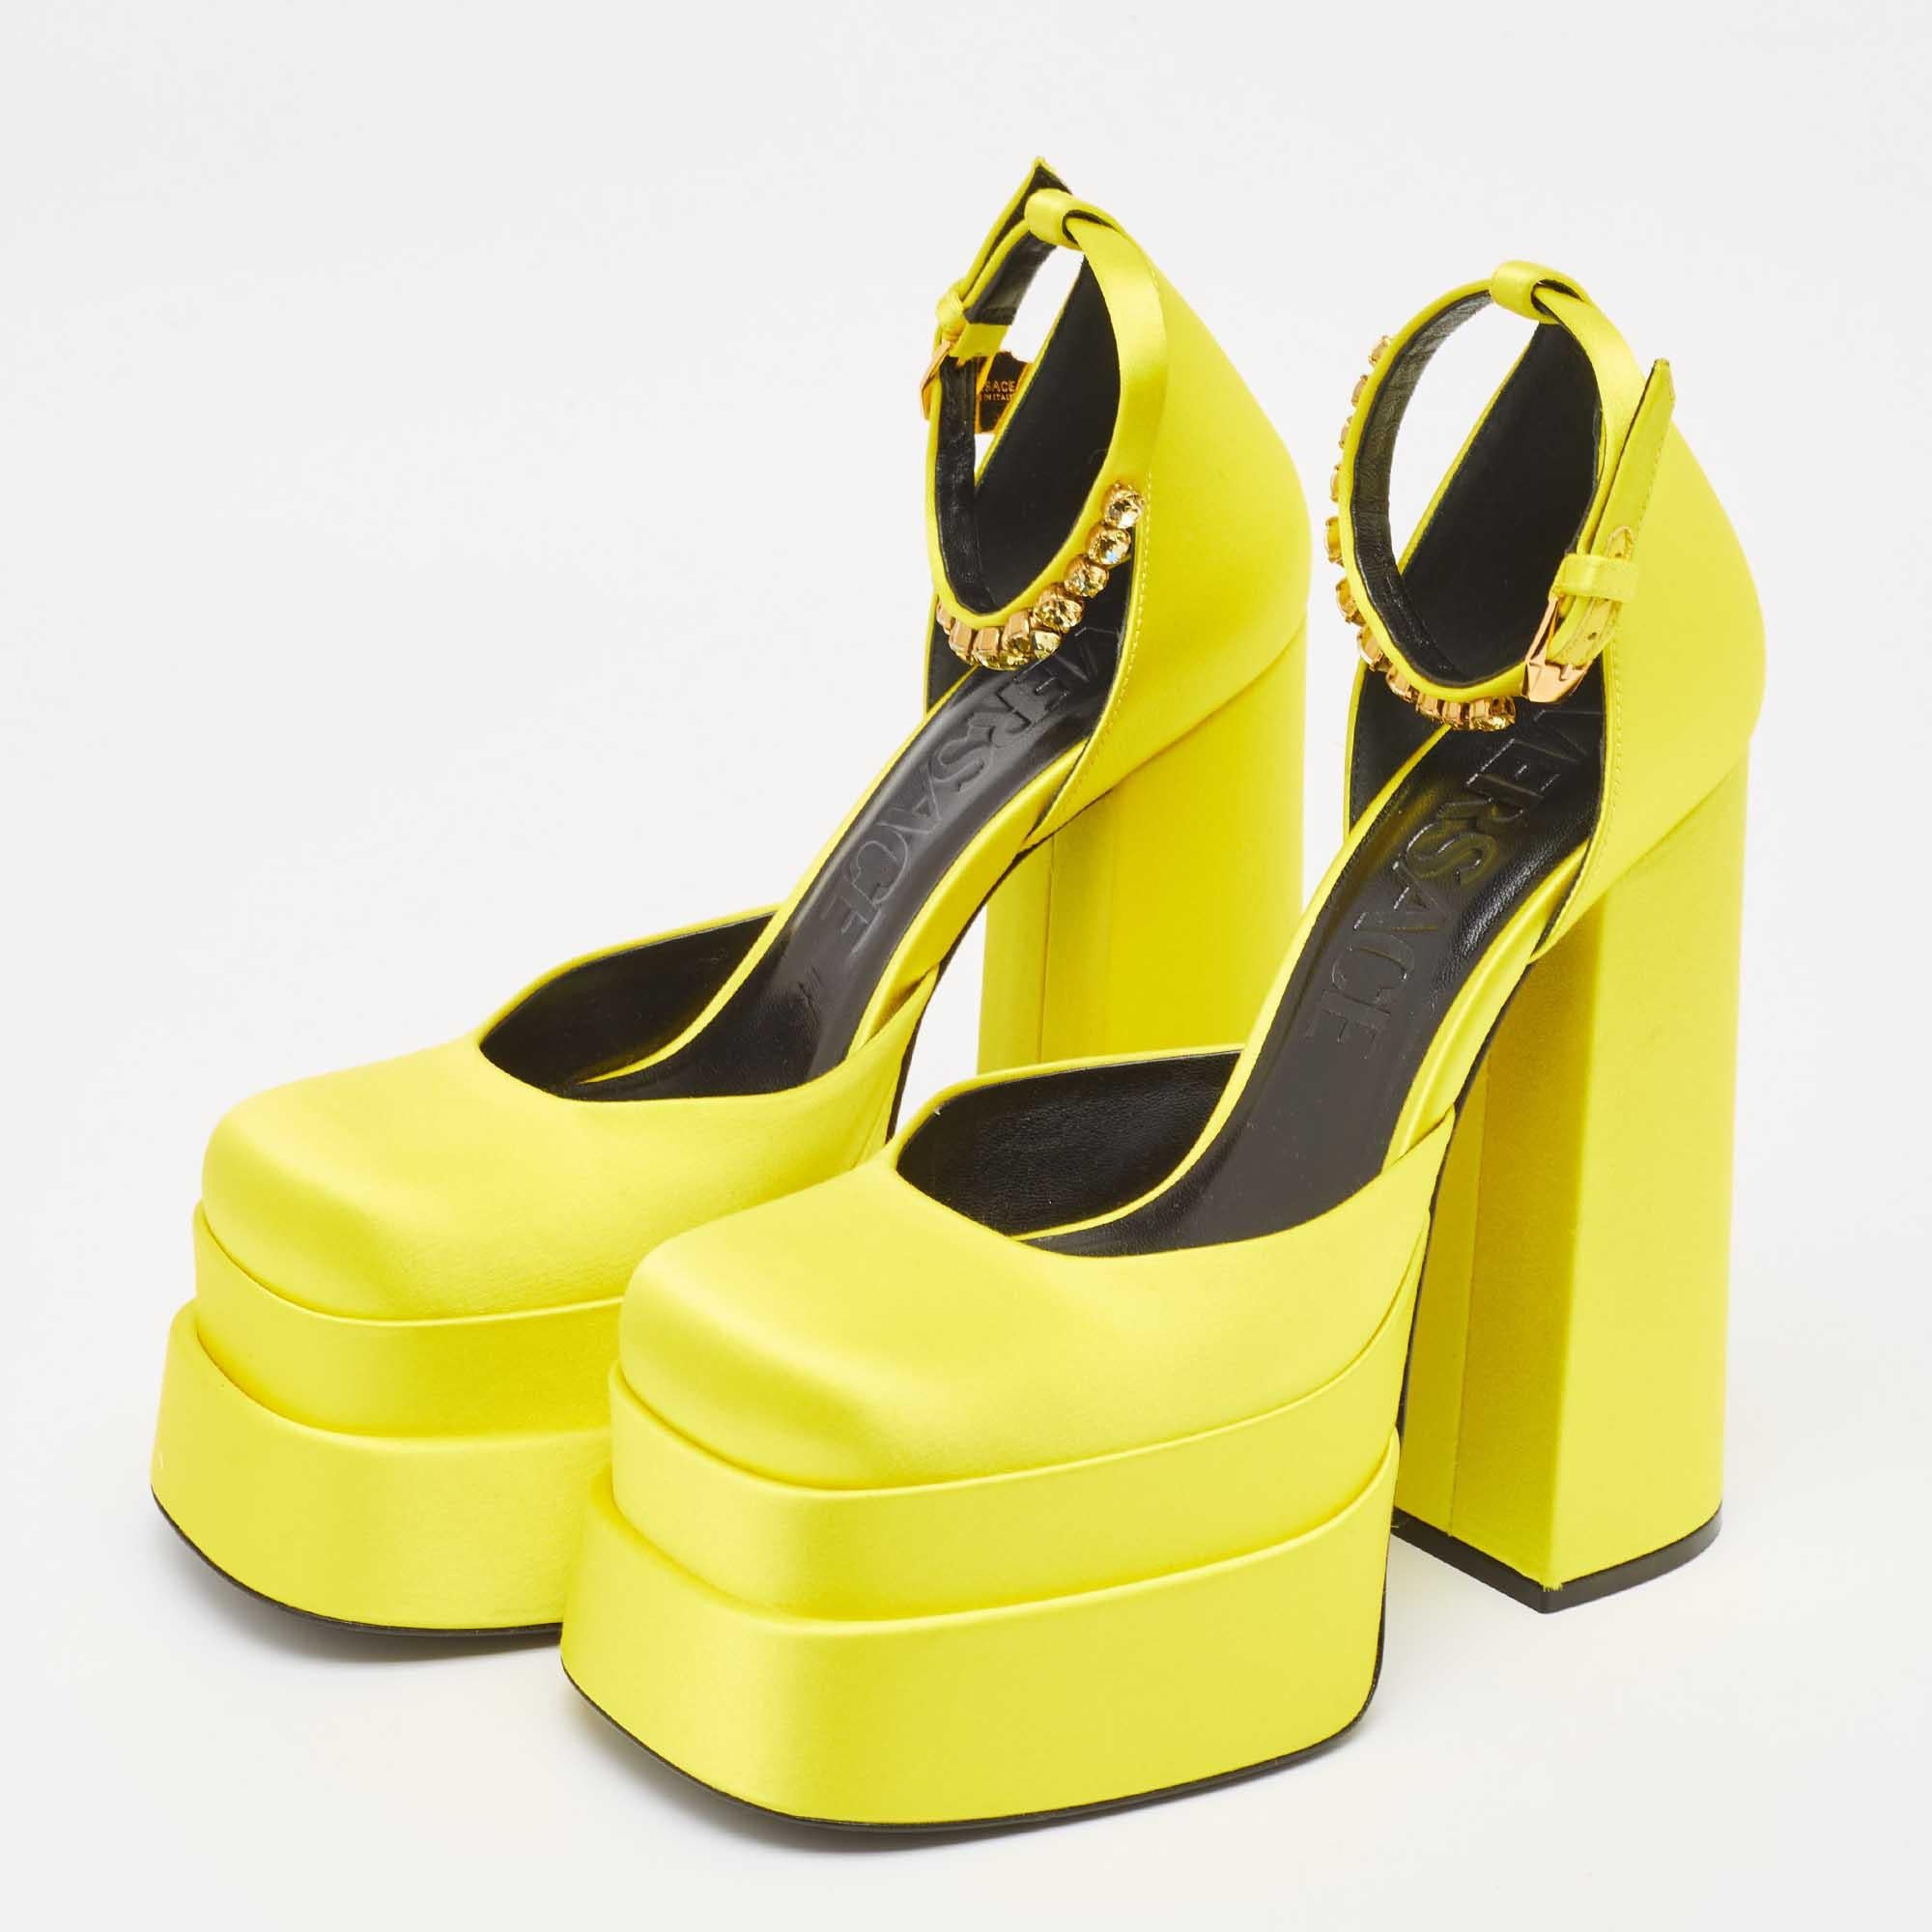 Versace Yellow Satin Aevitas Crystal Embellished Pumps Size 39 In Excellent Condition For Sale In Dubai, Al Qouz 2